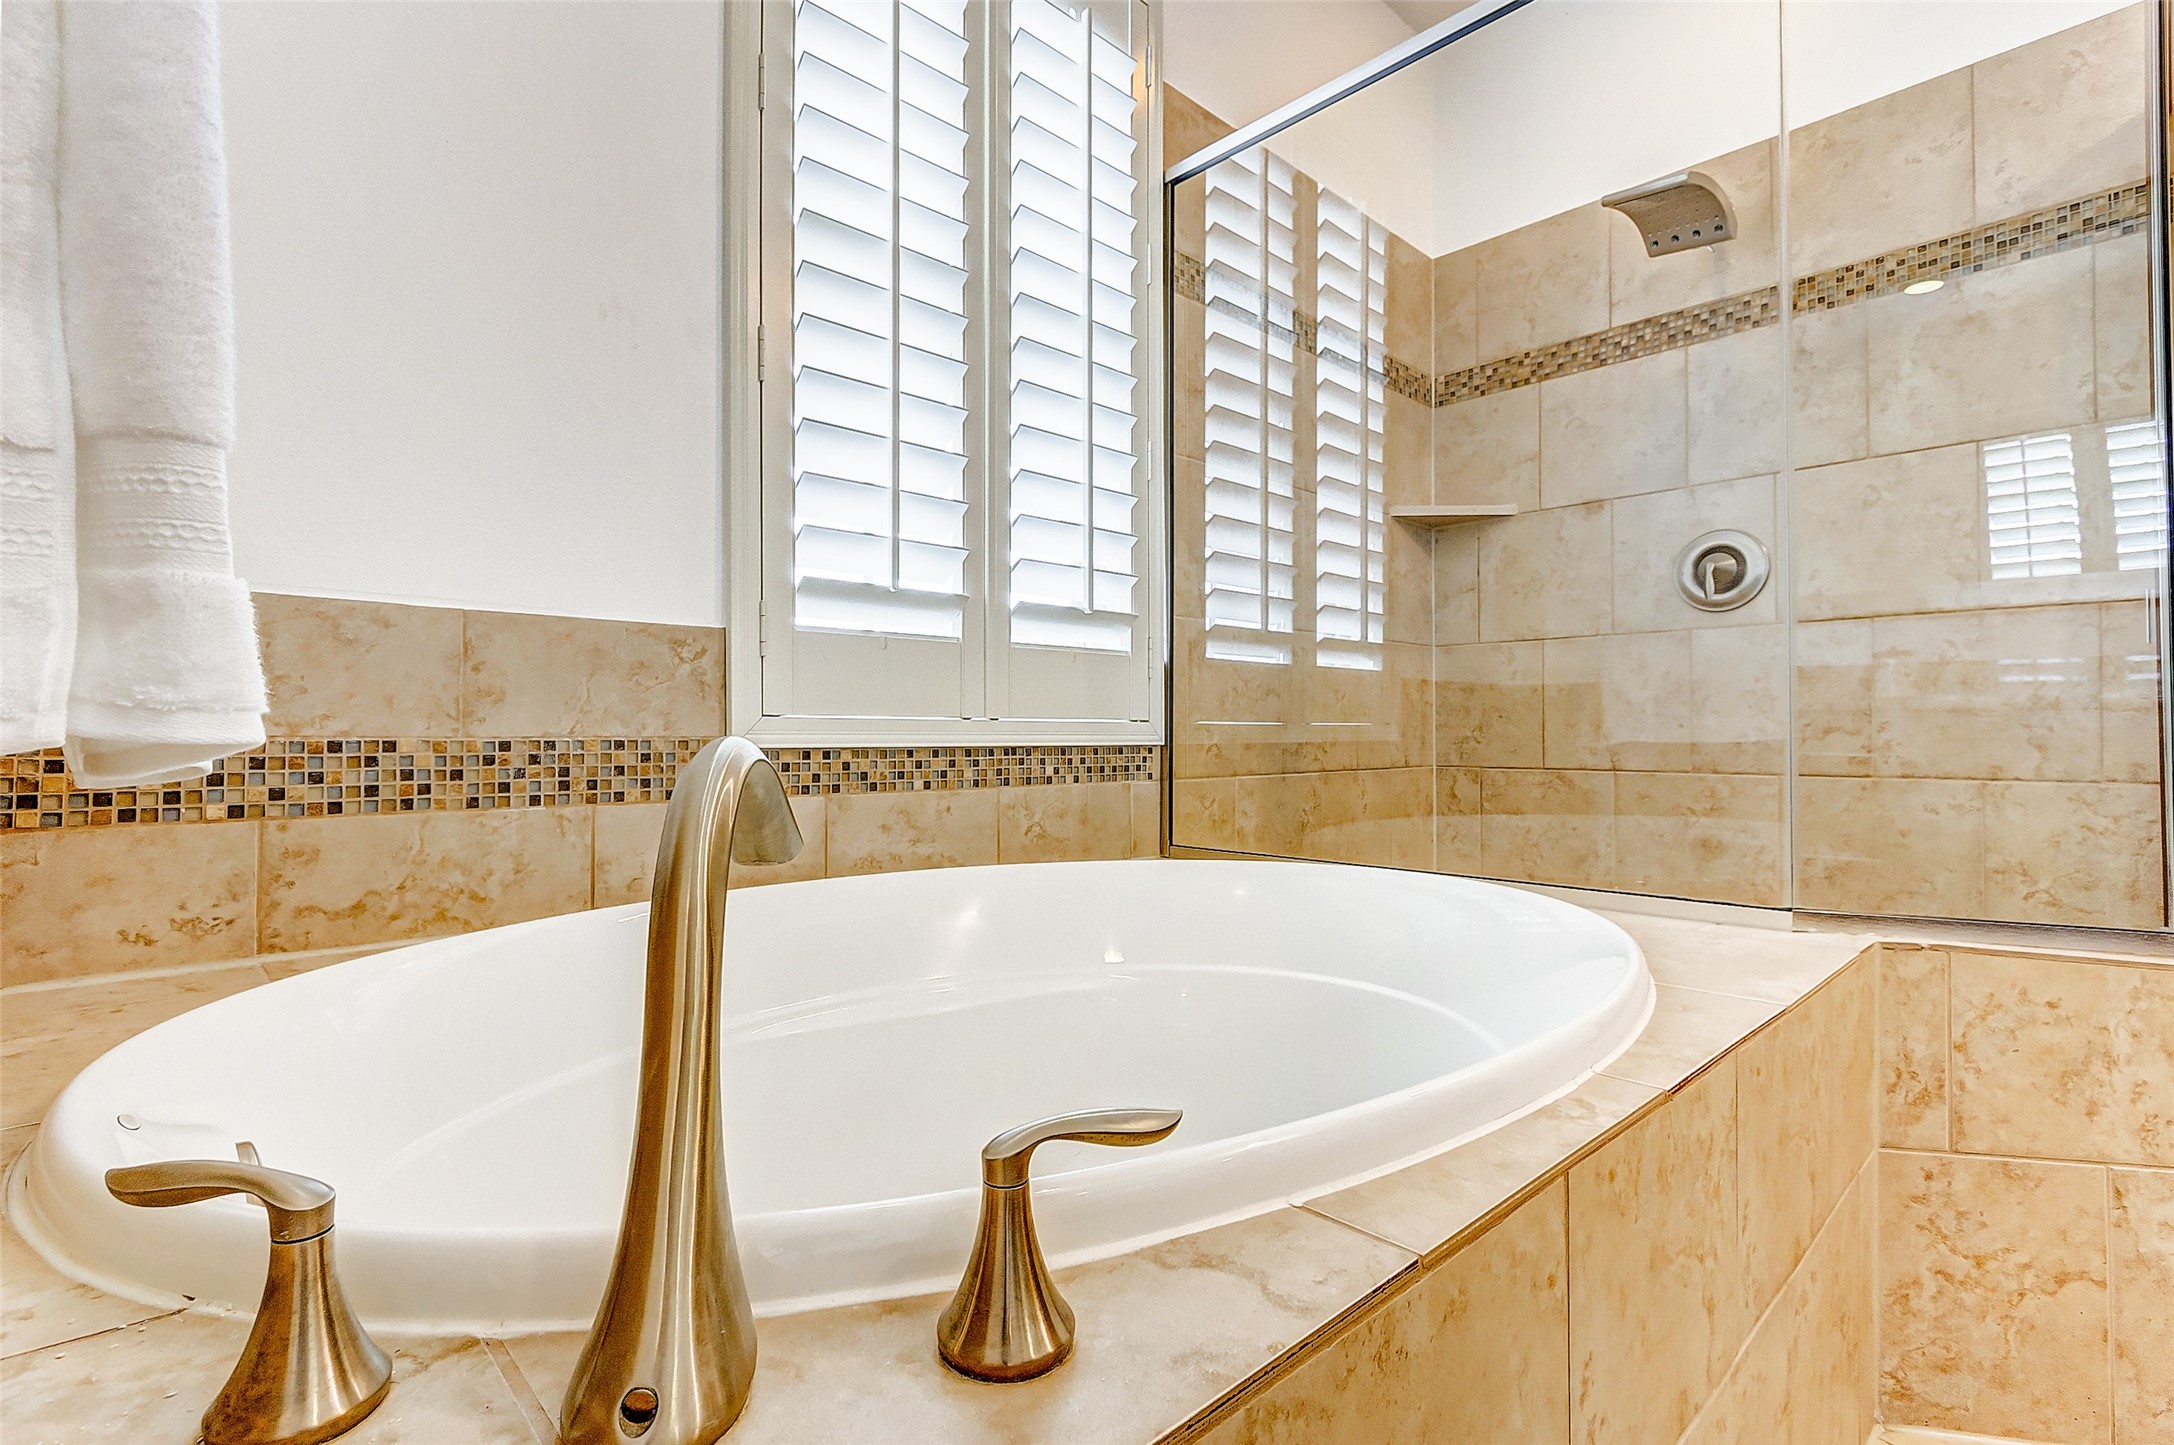 Your new garden tub sits beneath an obscure window lined with custom plantation shutters that allows for natural light without compromising privacy.